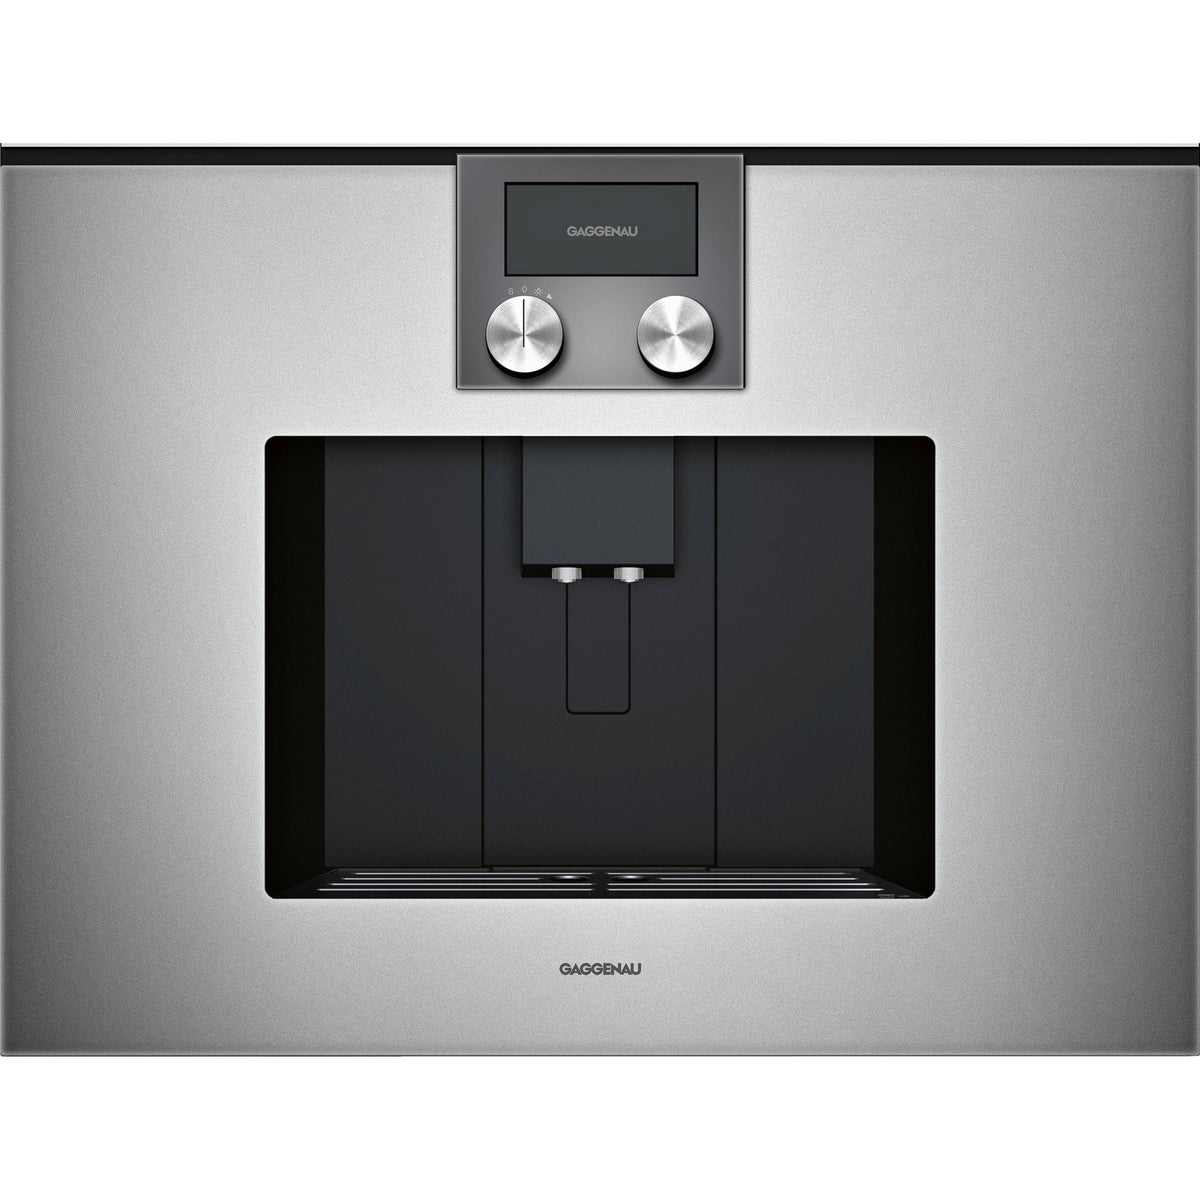 Gaggenau 24-inch Built-in Coffee System with TFT Touch Display CMP250711 IMAGE 1